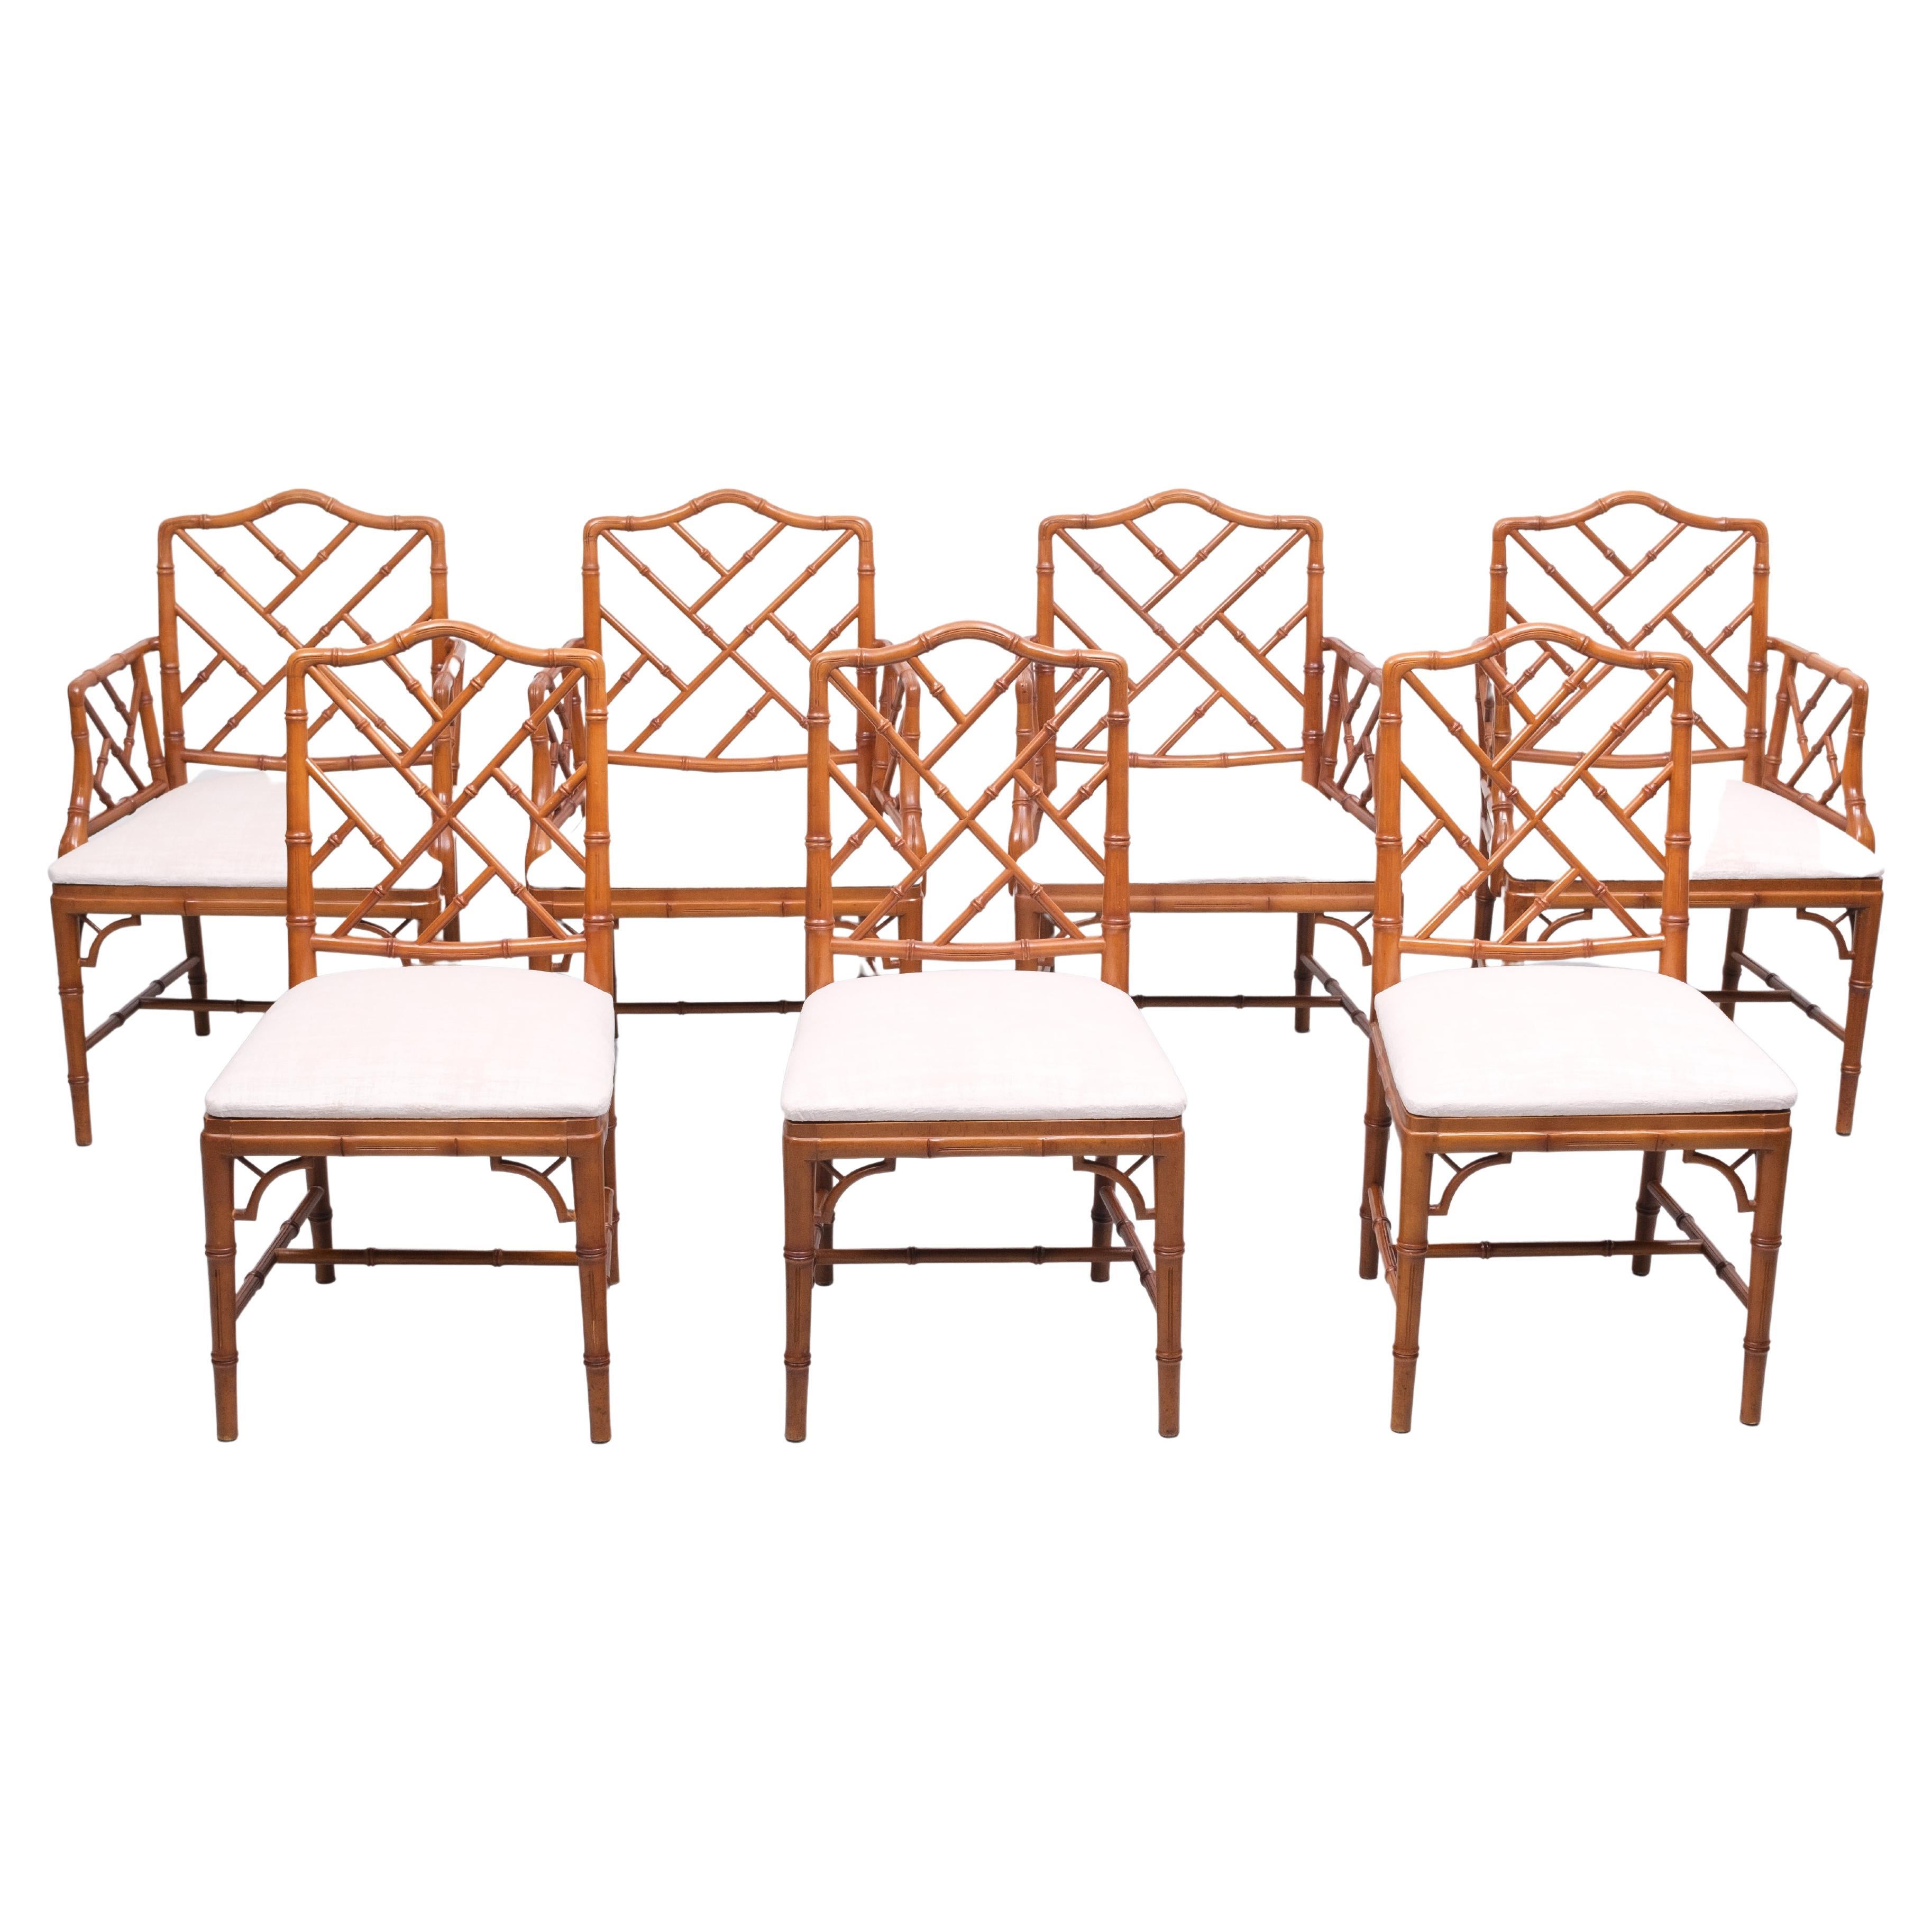 20th Century Chinese Chippendale Style Faux Bamboo Chairs